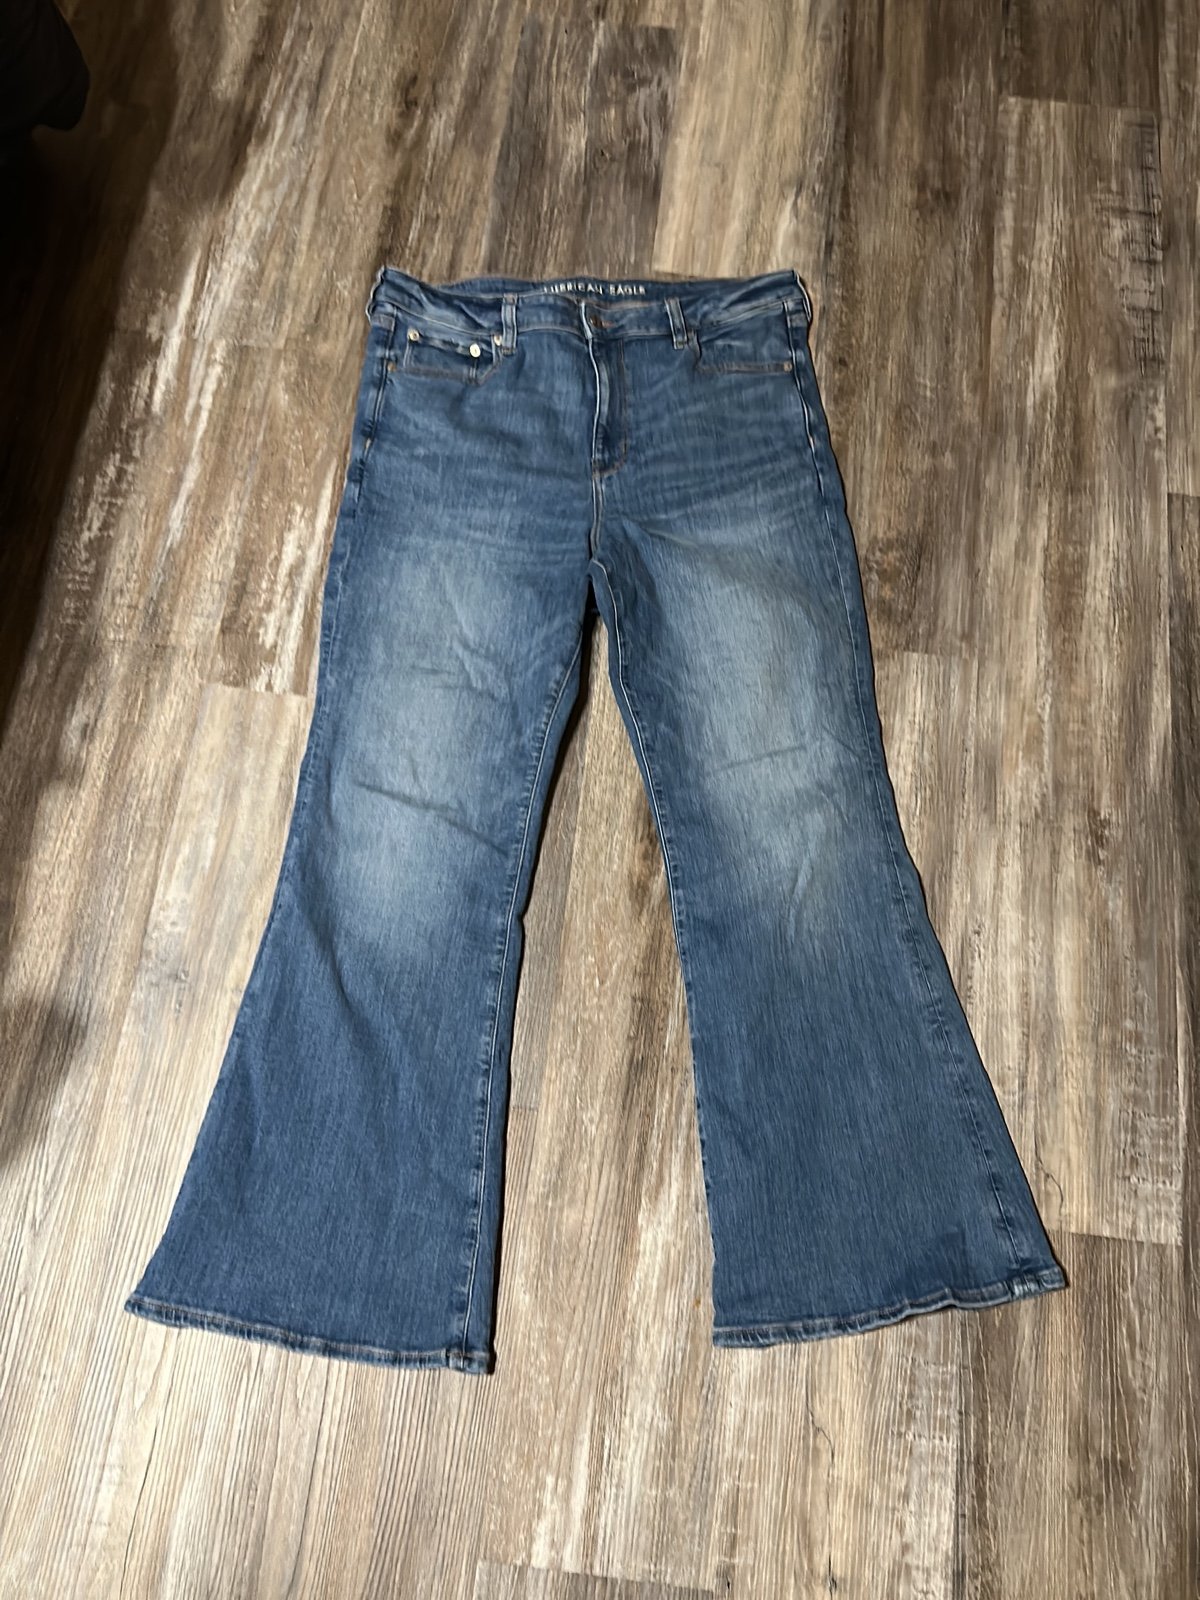 High quality American Eagle Flare Jeans GkUOzoeQL online store